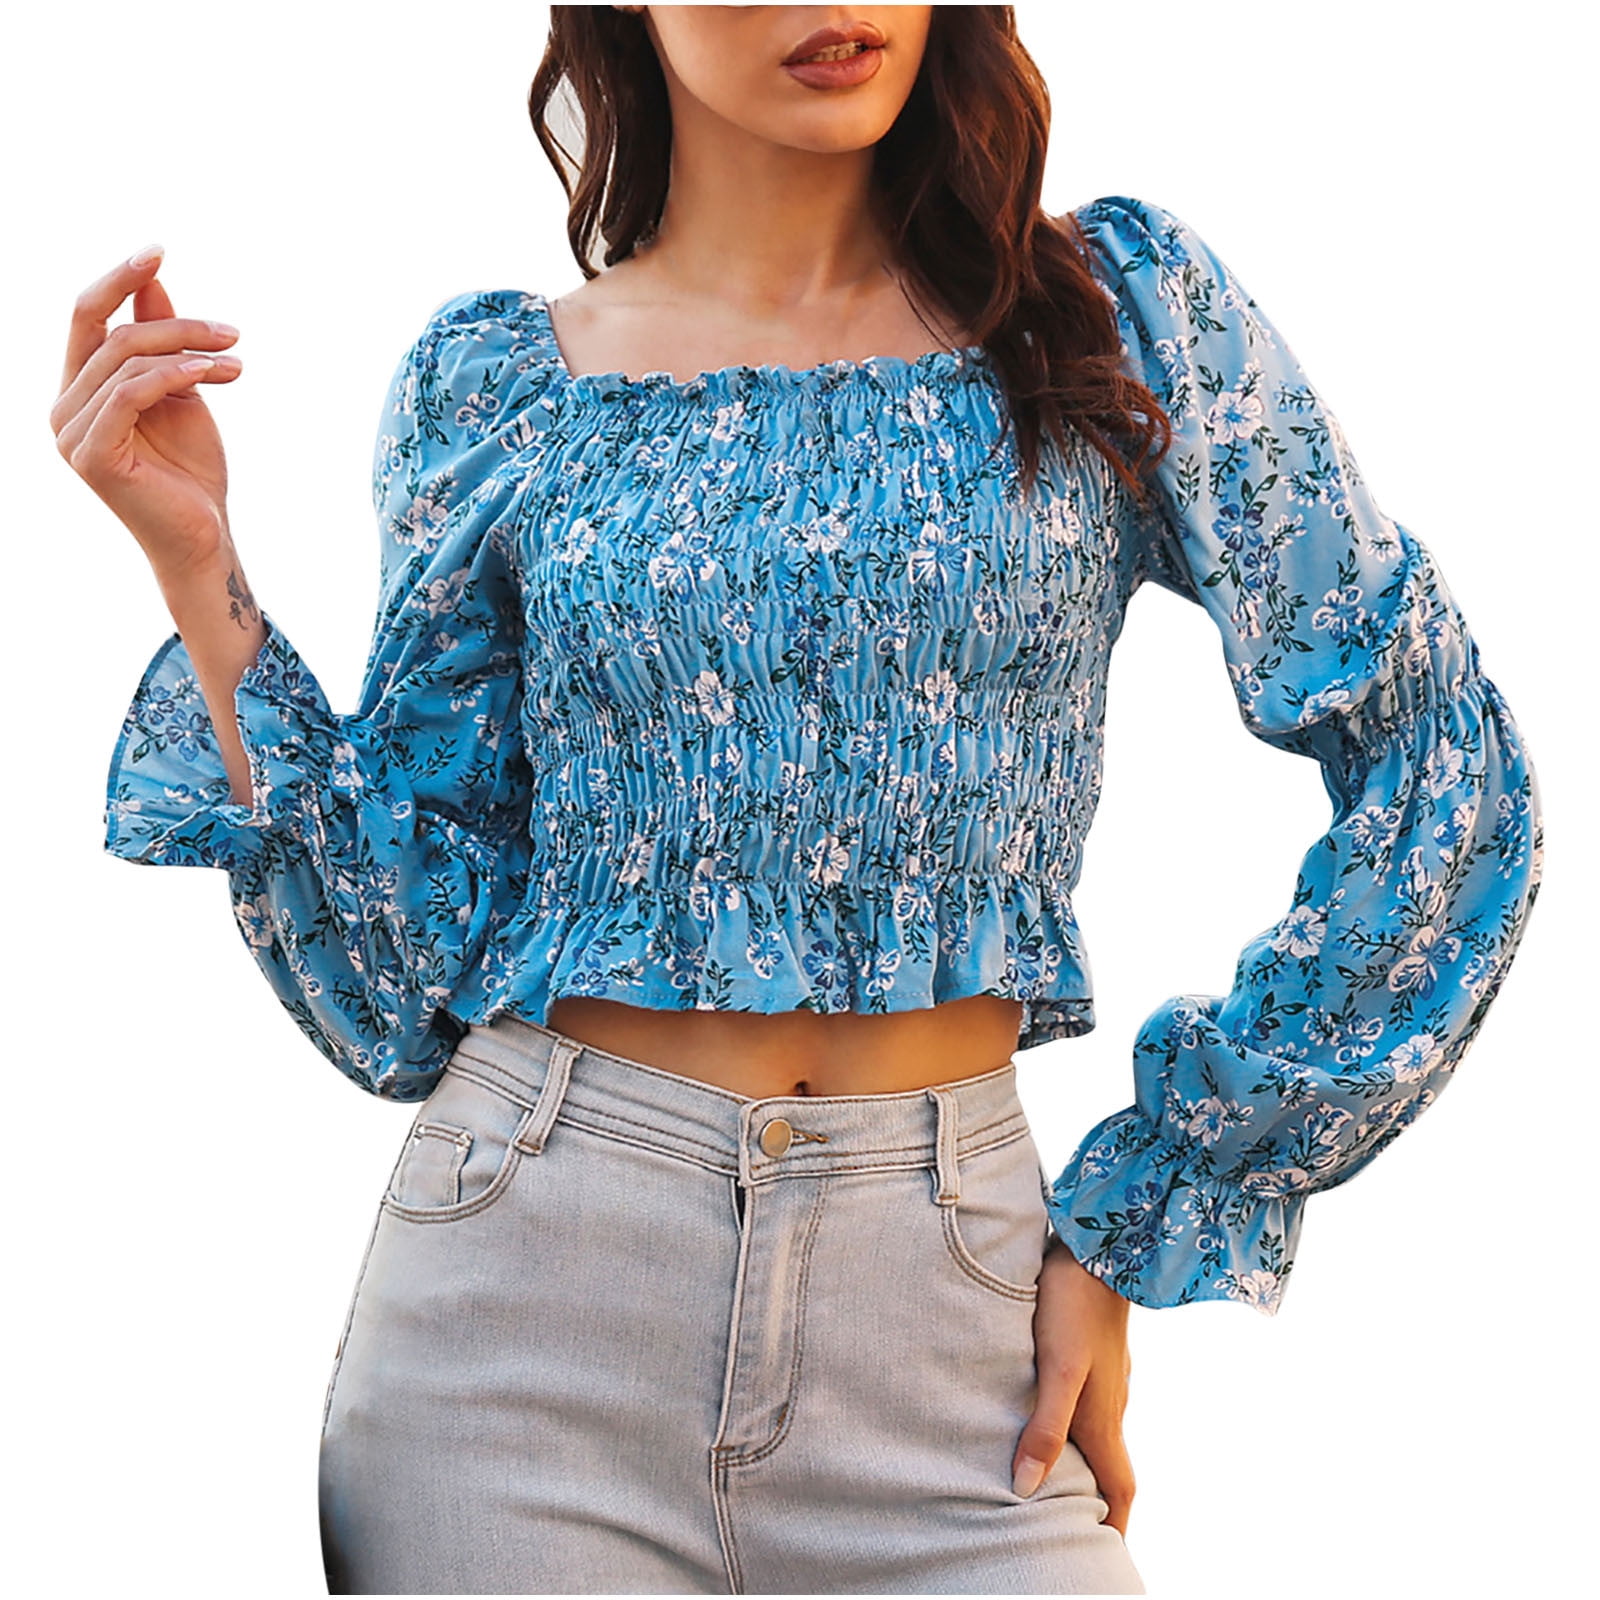 Square Neck Puff Sleeve Crop Top, Women Square Neck Floral Print Lantern Long  Sleeve Back Tie Up Bowknot Crop Top Blouse 